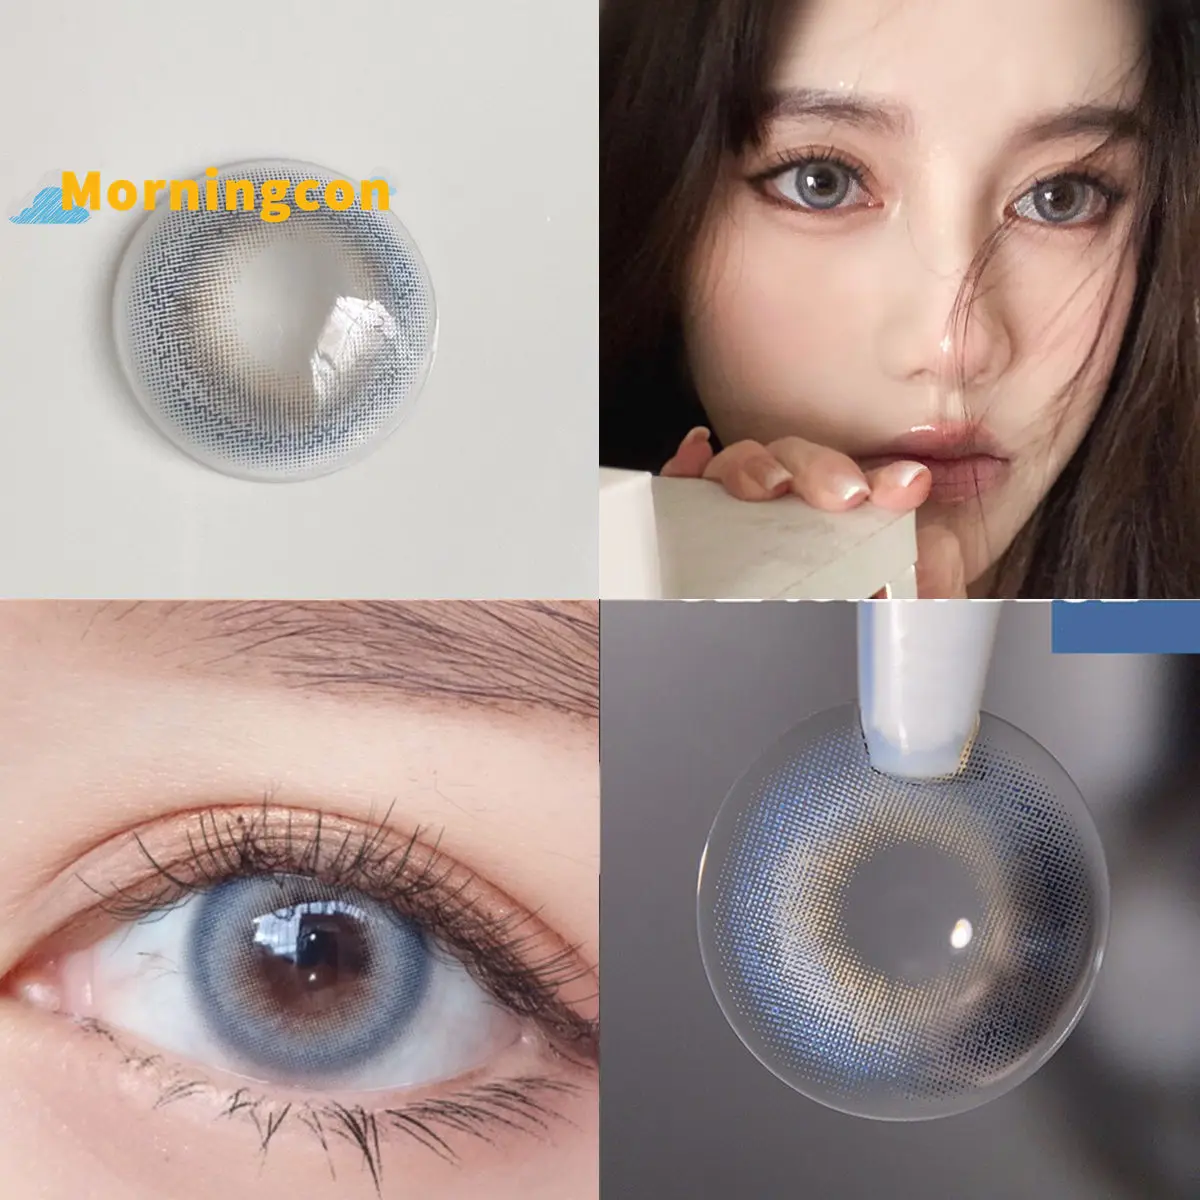 

MORNINGCON Highlight Blue Myopia Prescription Soft Colored Contacts Lenses For Eyes Small Beauty Pupil Make Up Natural Yearly